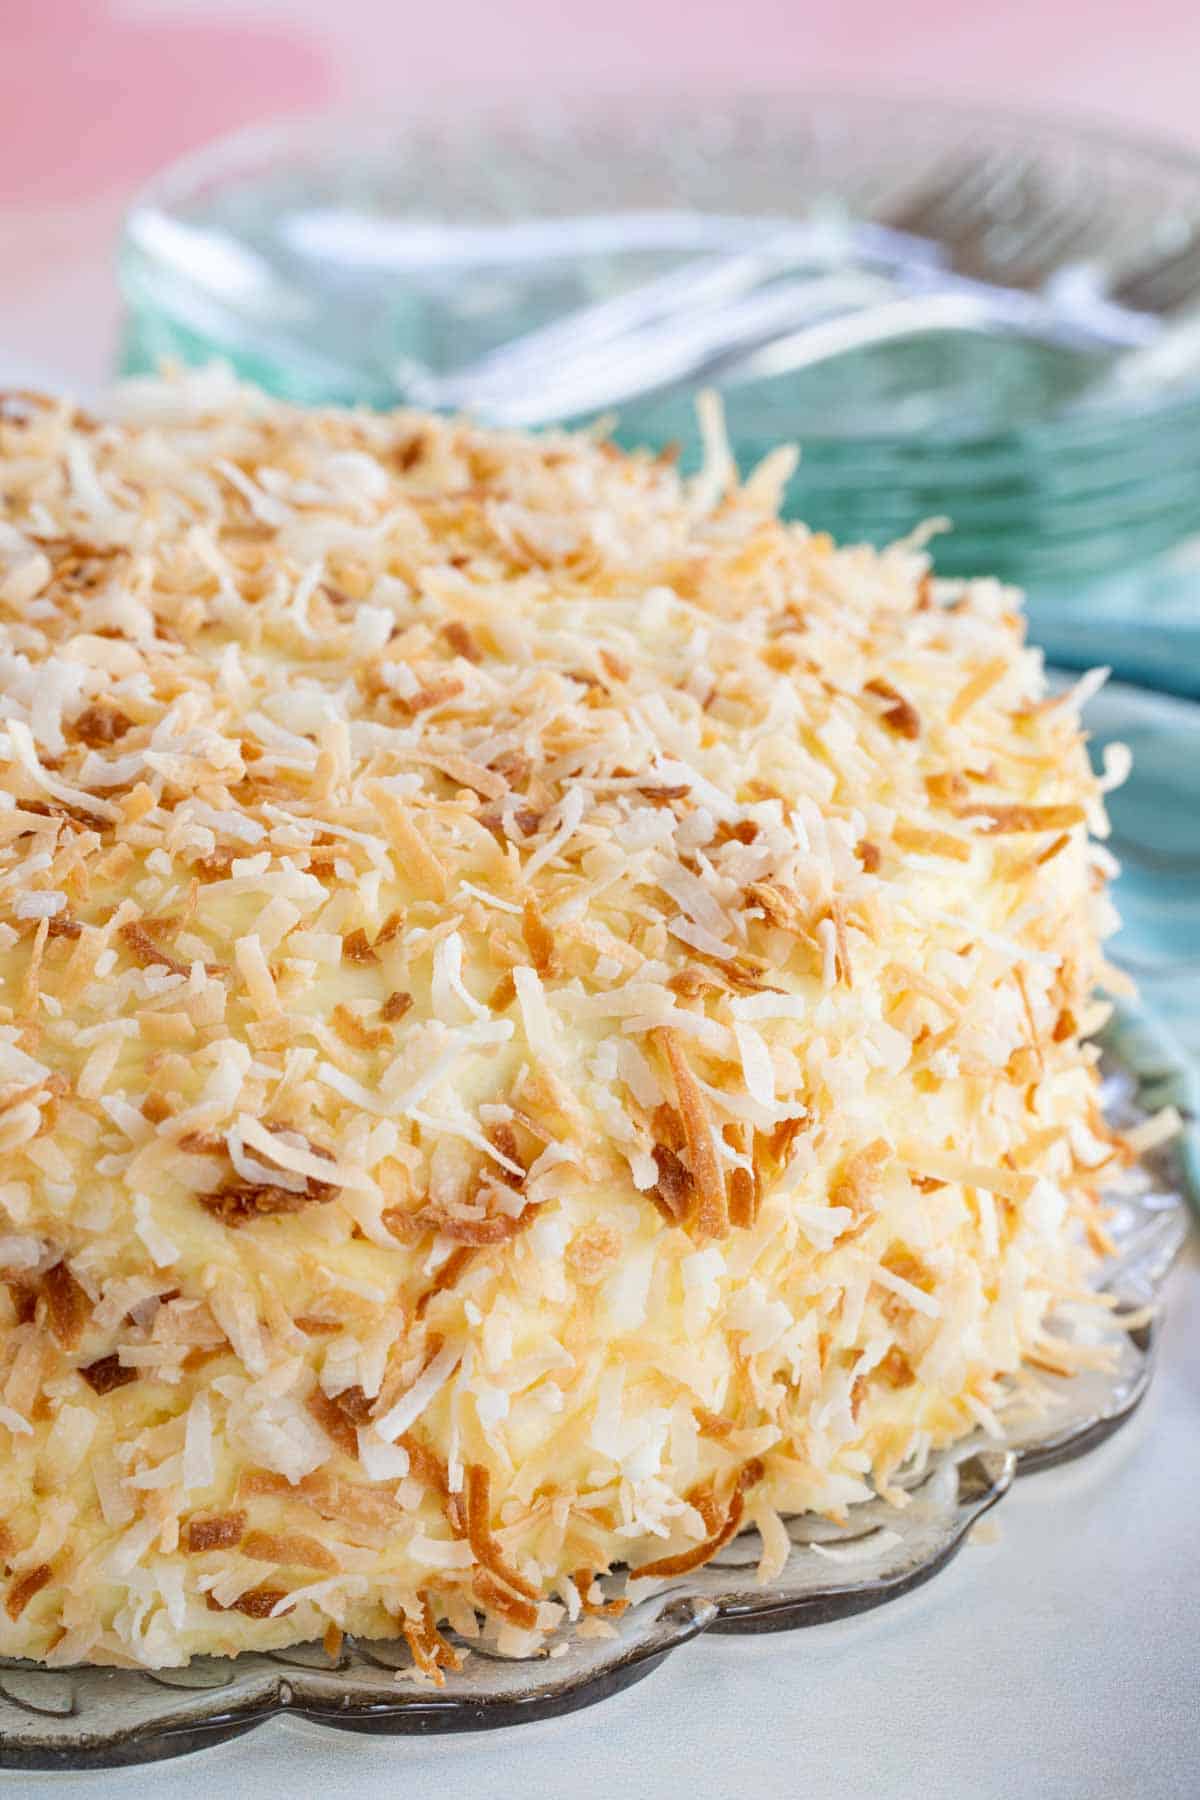 Toasted coconut covering the outside of Gluten Free Coconut Cake.